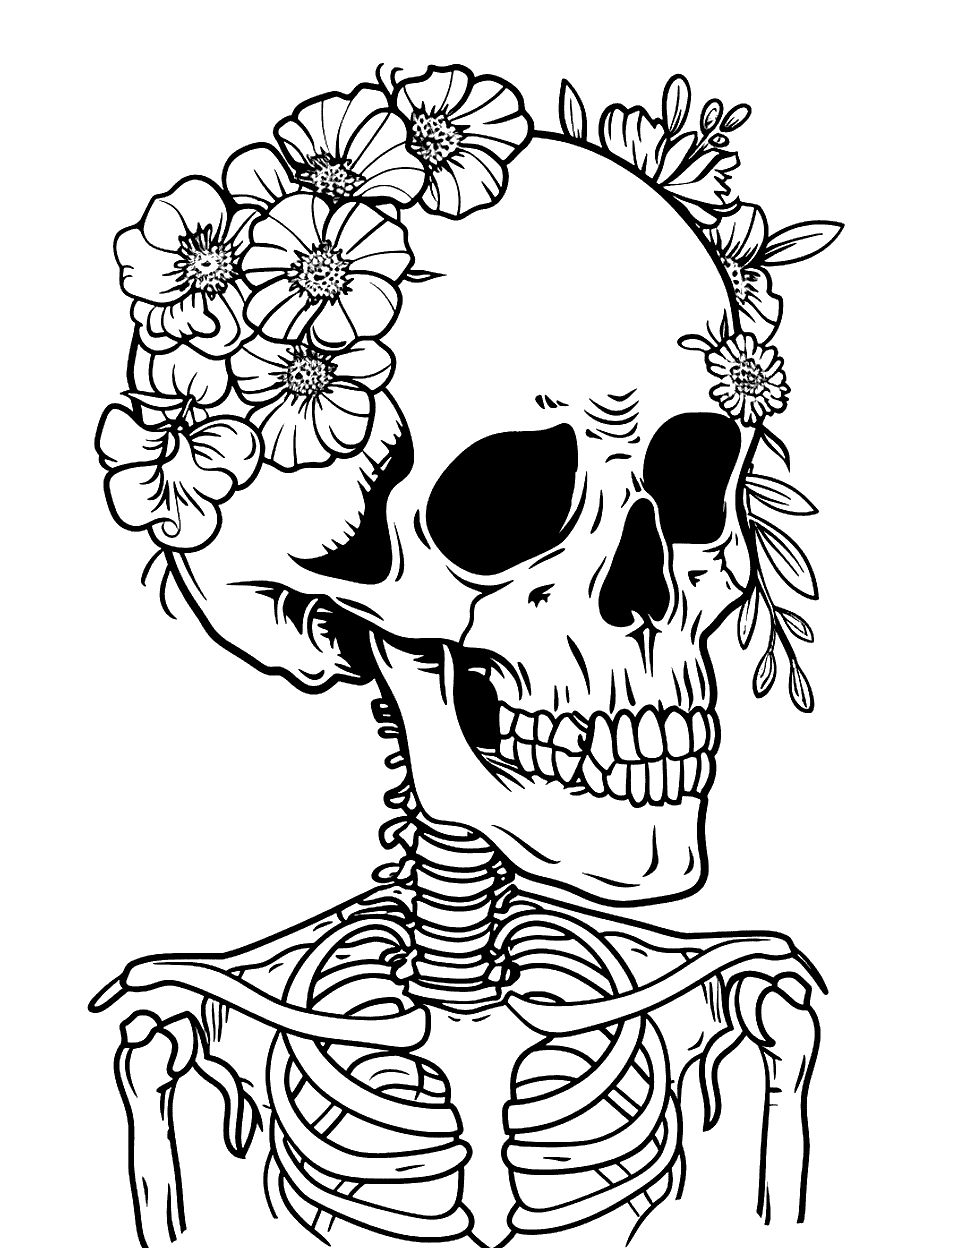 Aesthetic Floral Skull Skeleton Coloring Page - A skull with beautiful flowers growing around it, combining beauty with the macabre.